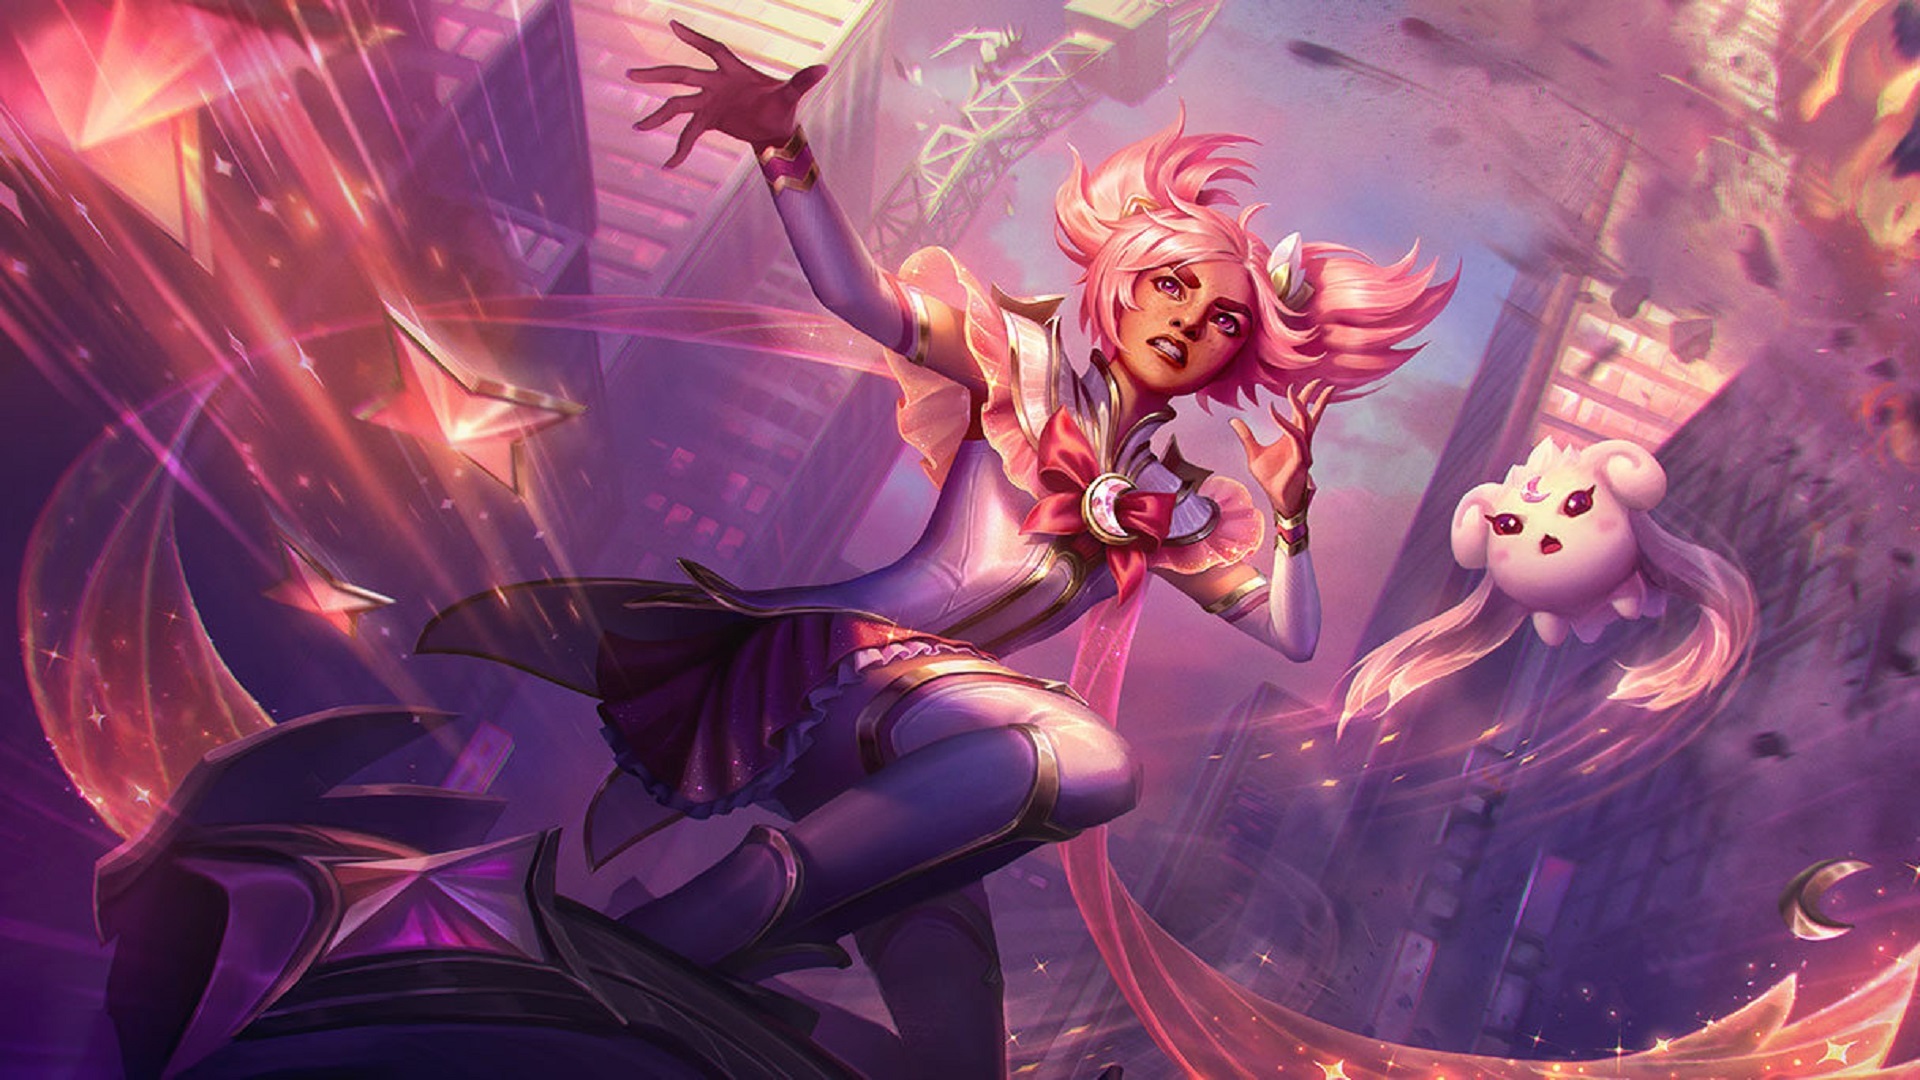 All League of Legends Star Guardian Taliyah skin money goes to charity